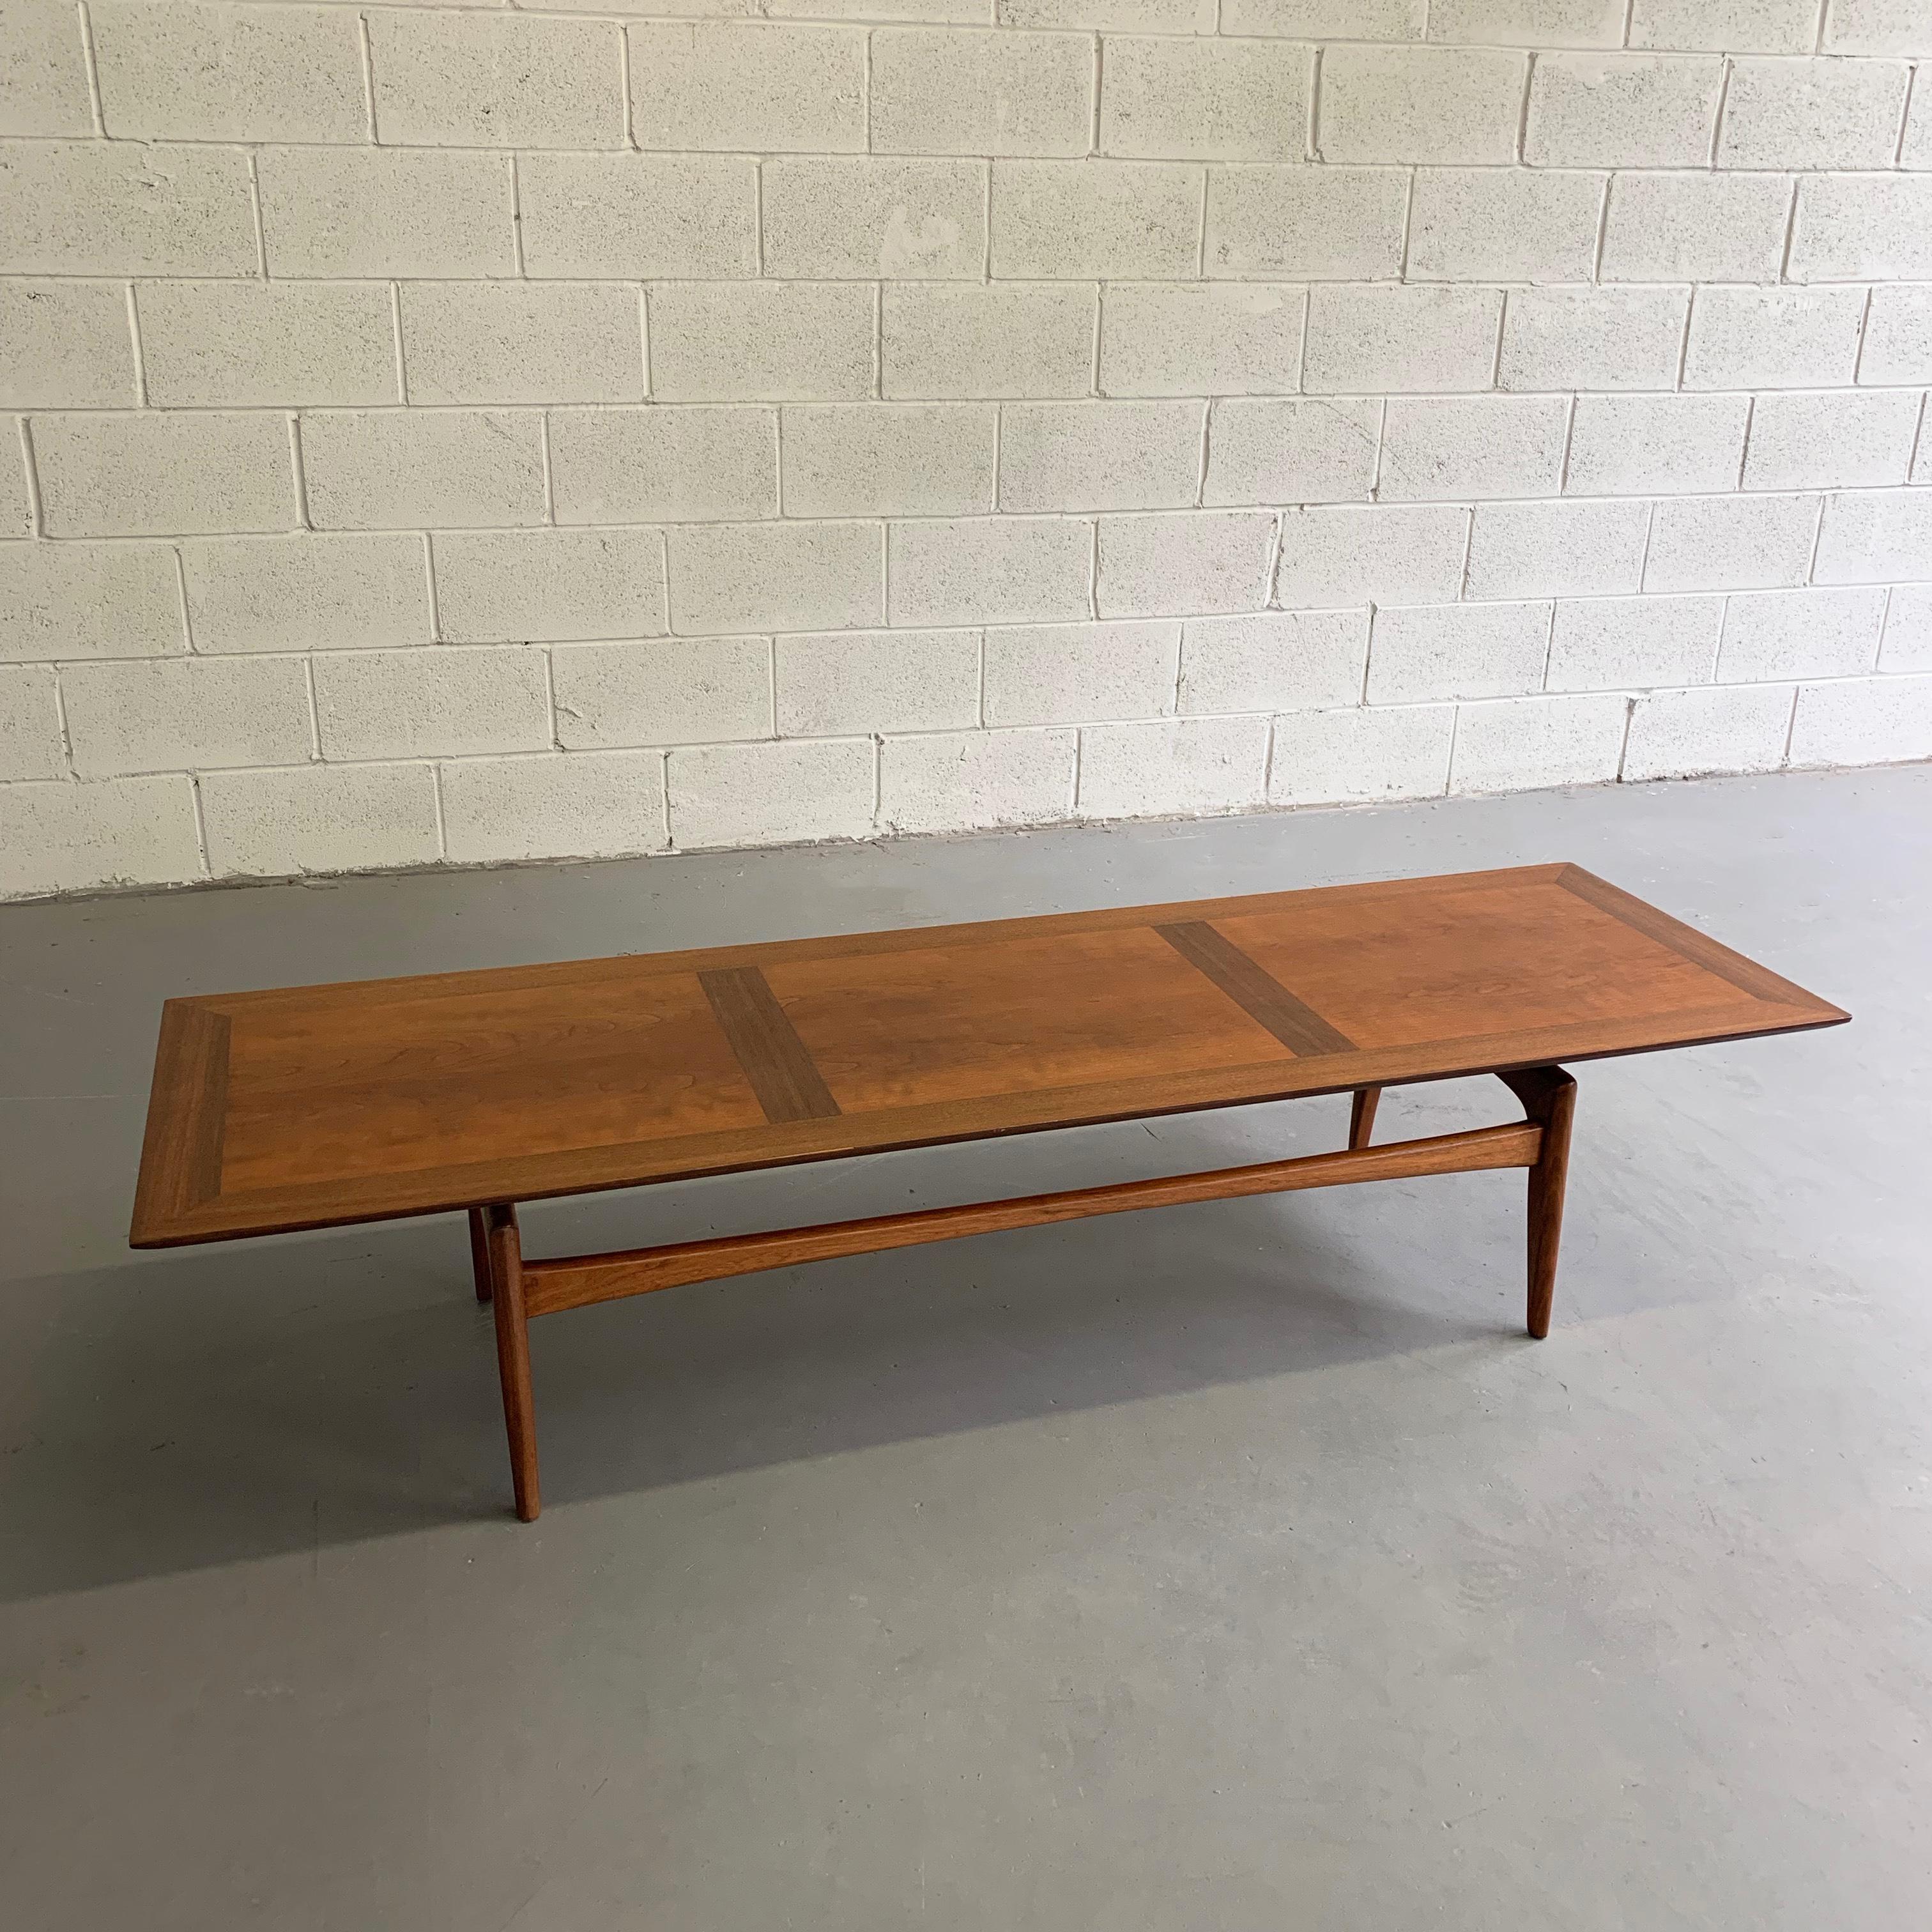 Mid-Century Modern, coffee table manufactured by John Stuart features a cherry and walnut parquetry top with floating walnut base.